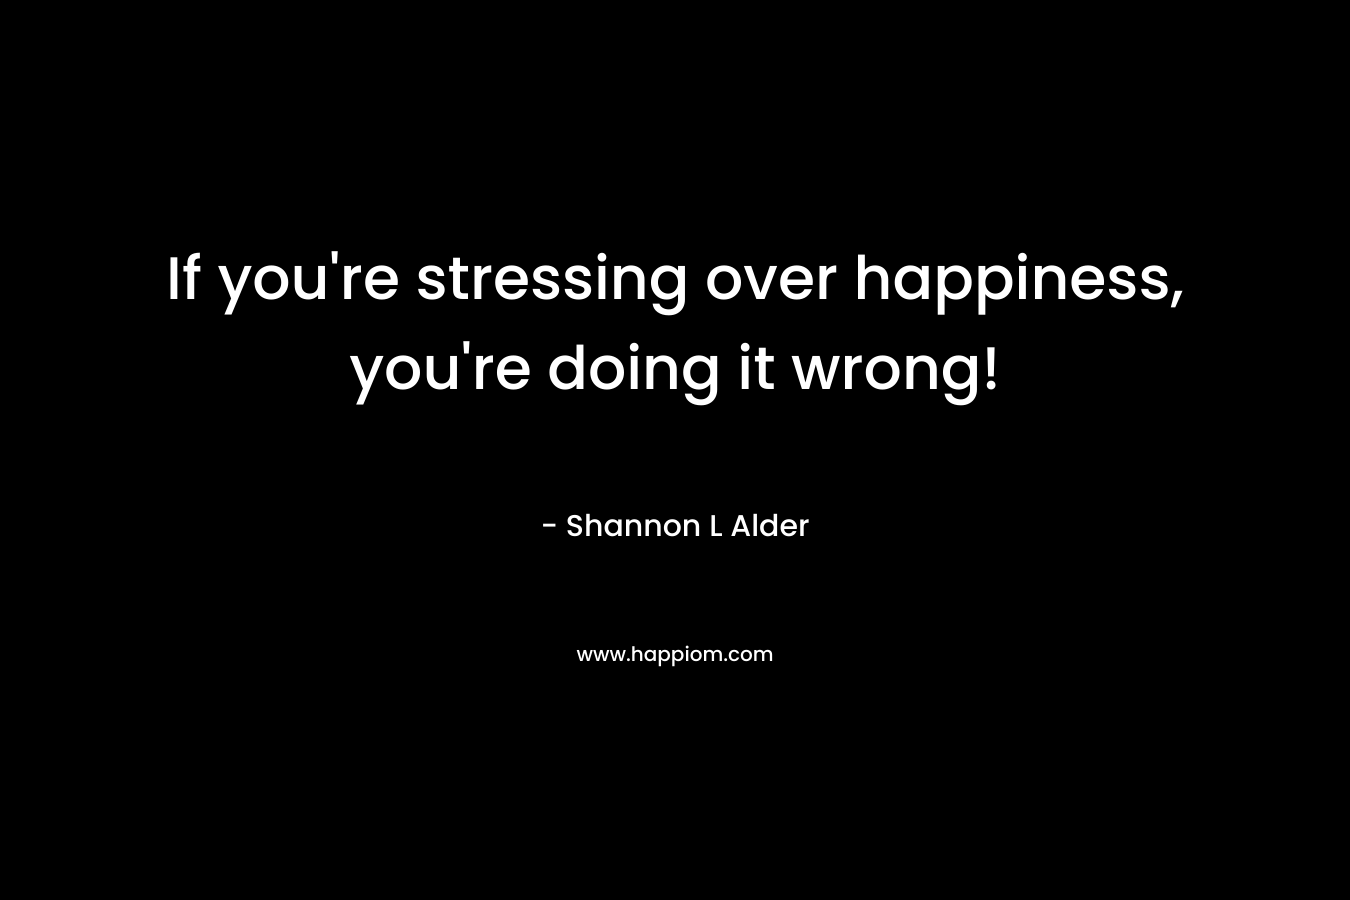 If you're stressing over happiness, you're doing it wrong!